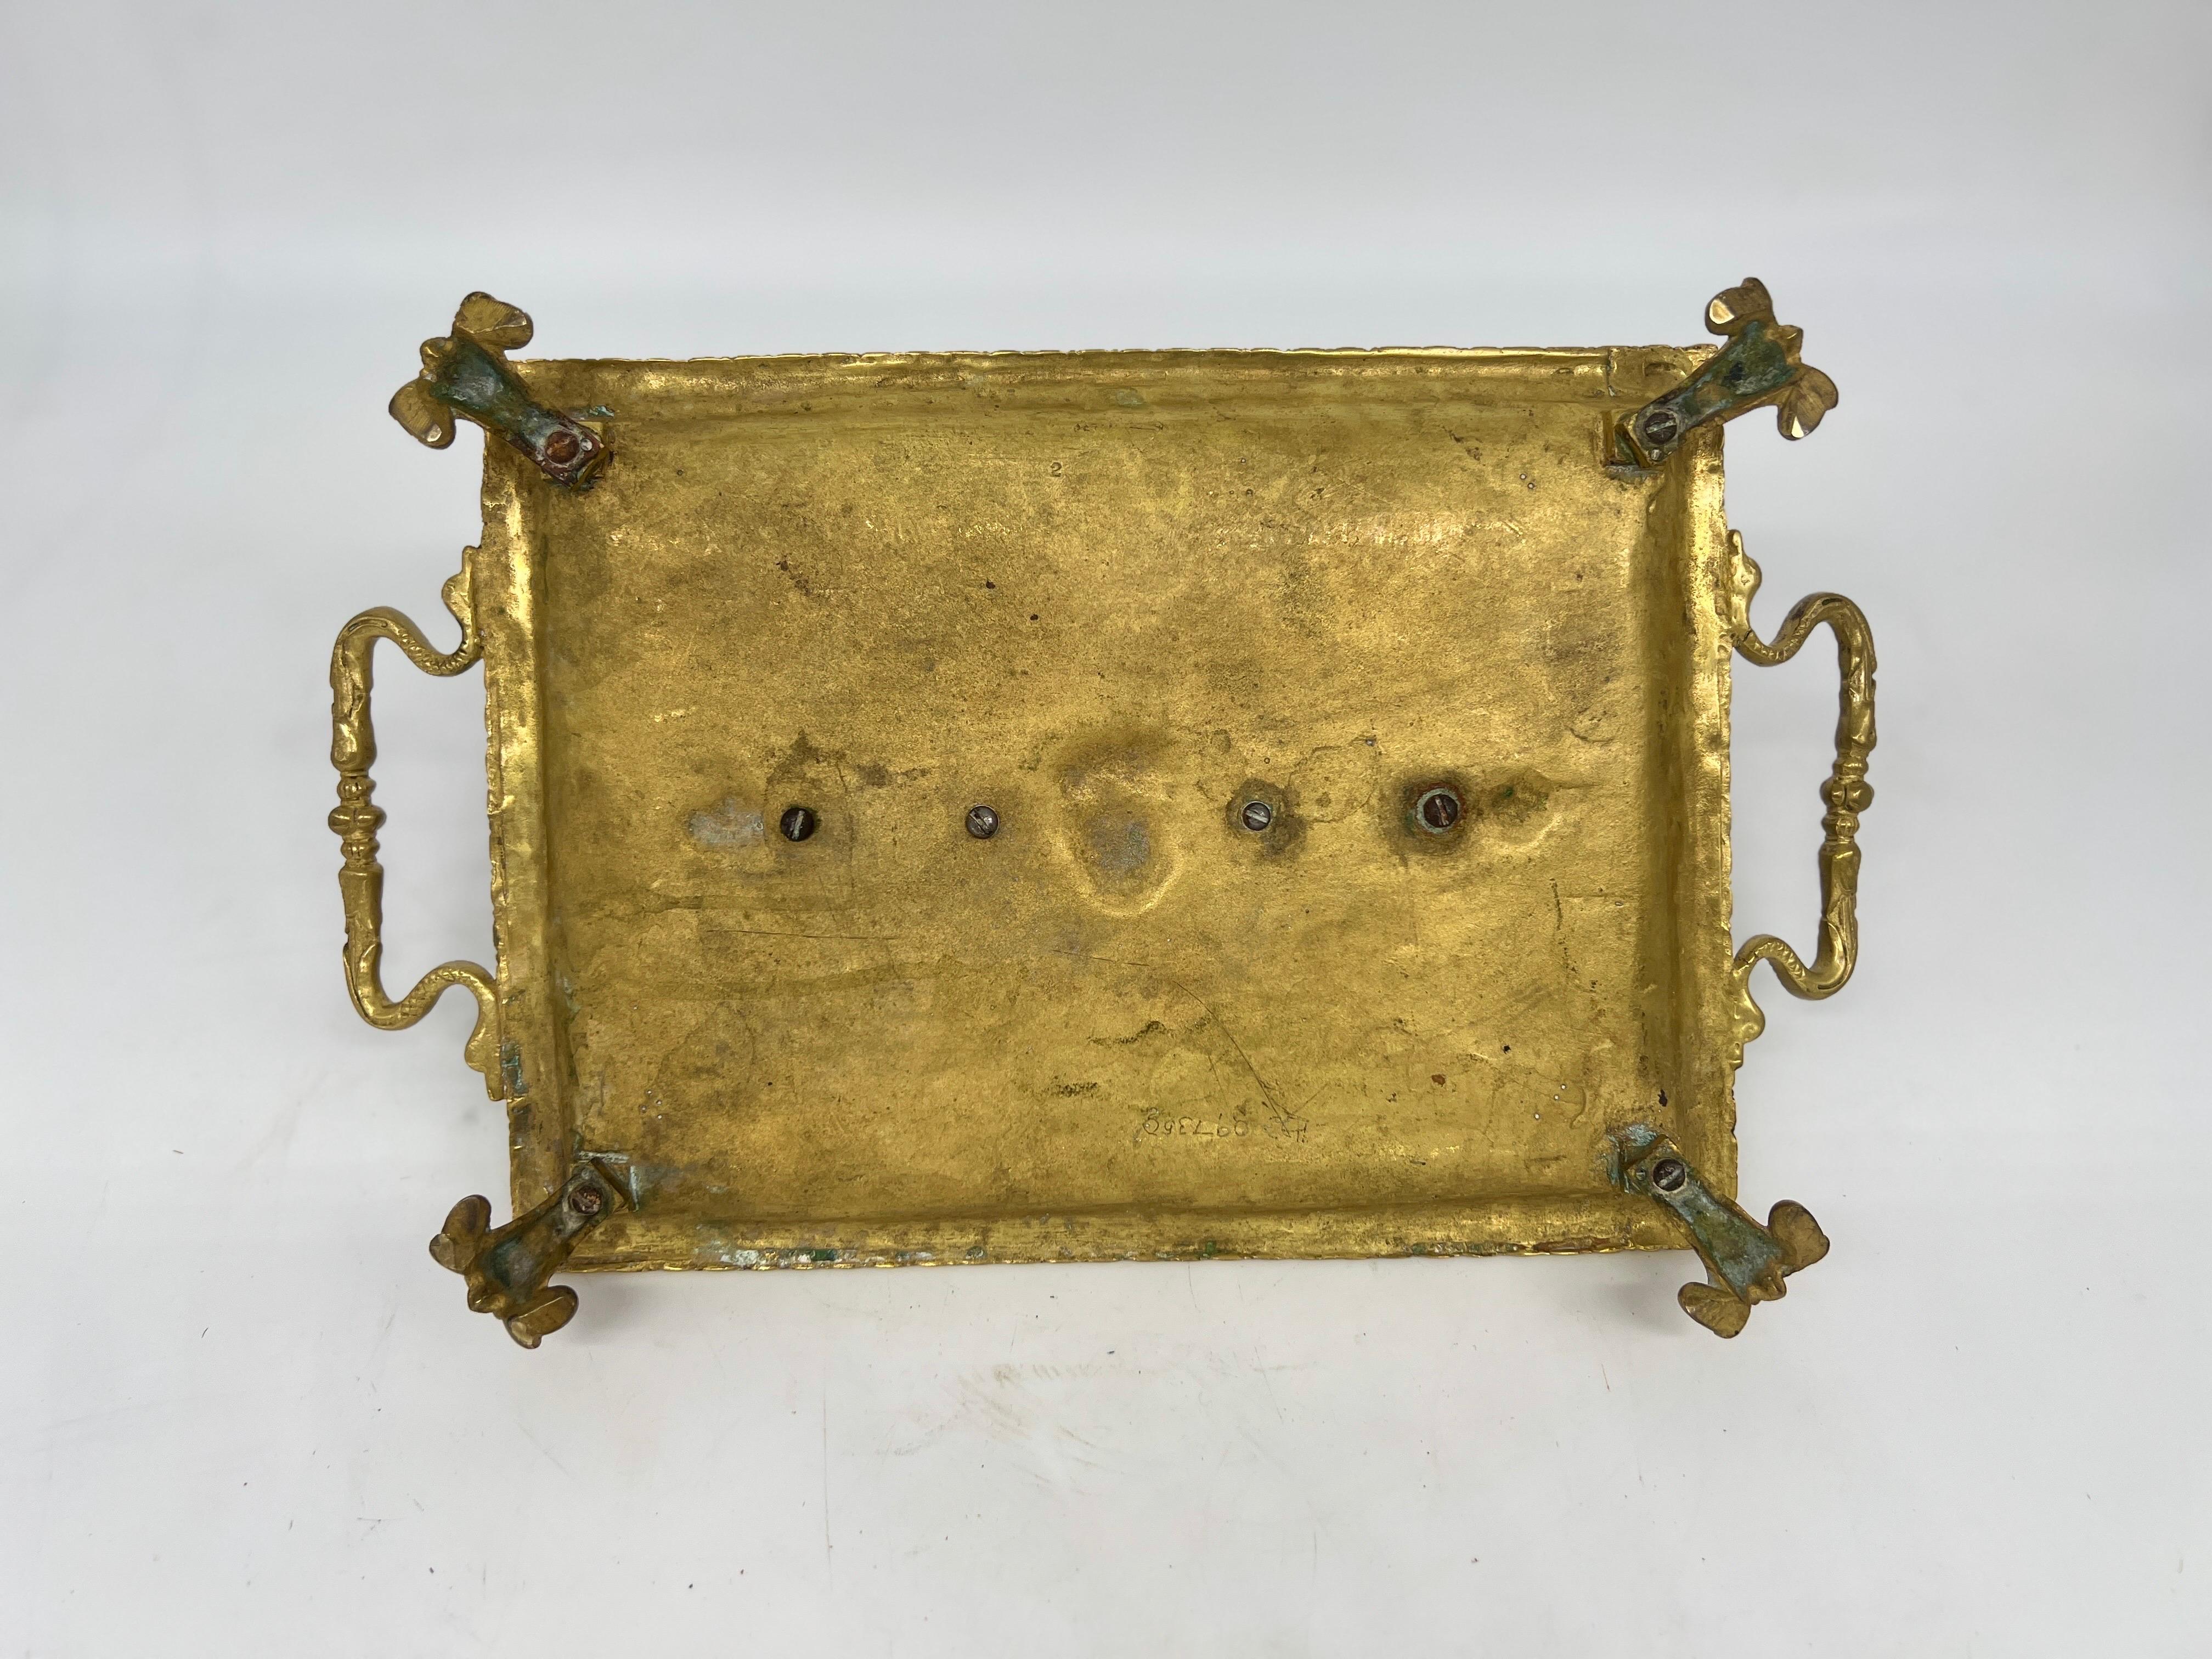 Emancipation Proclamation Inkstand - 19th Century Heavily Chased Brass For Sale 6